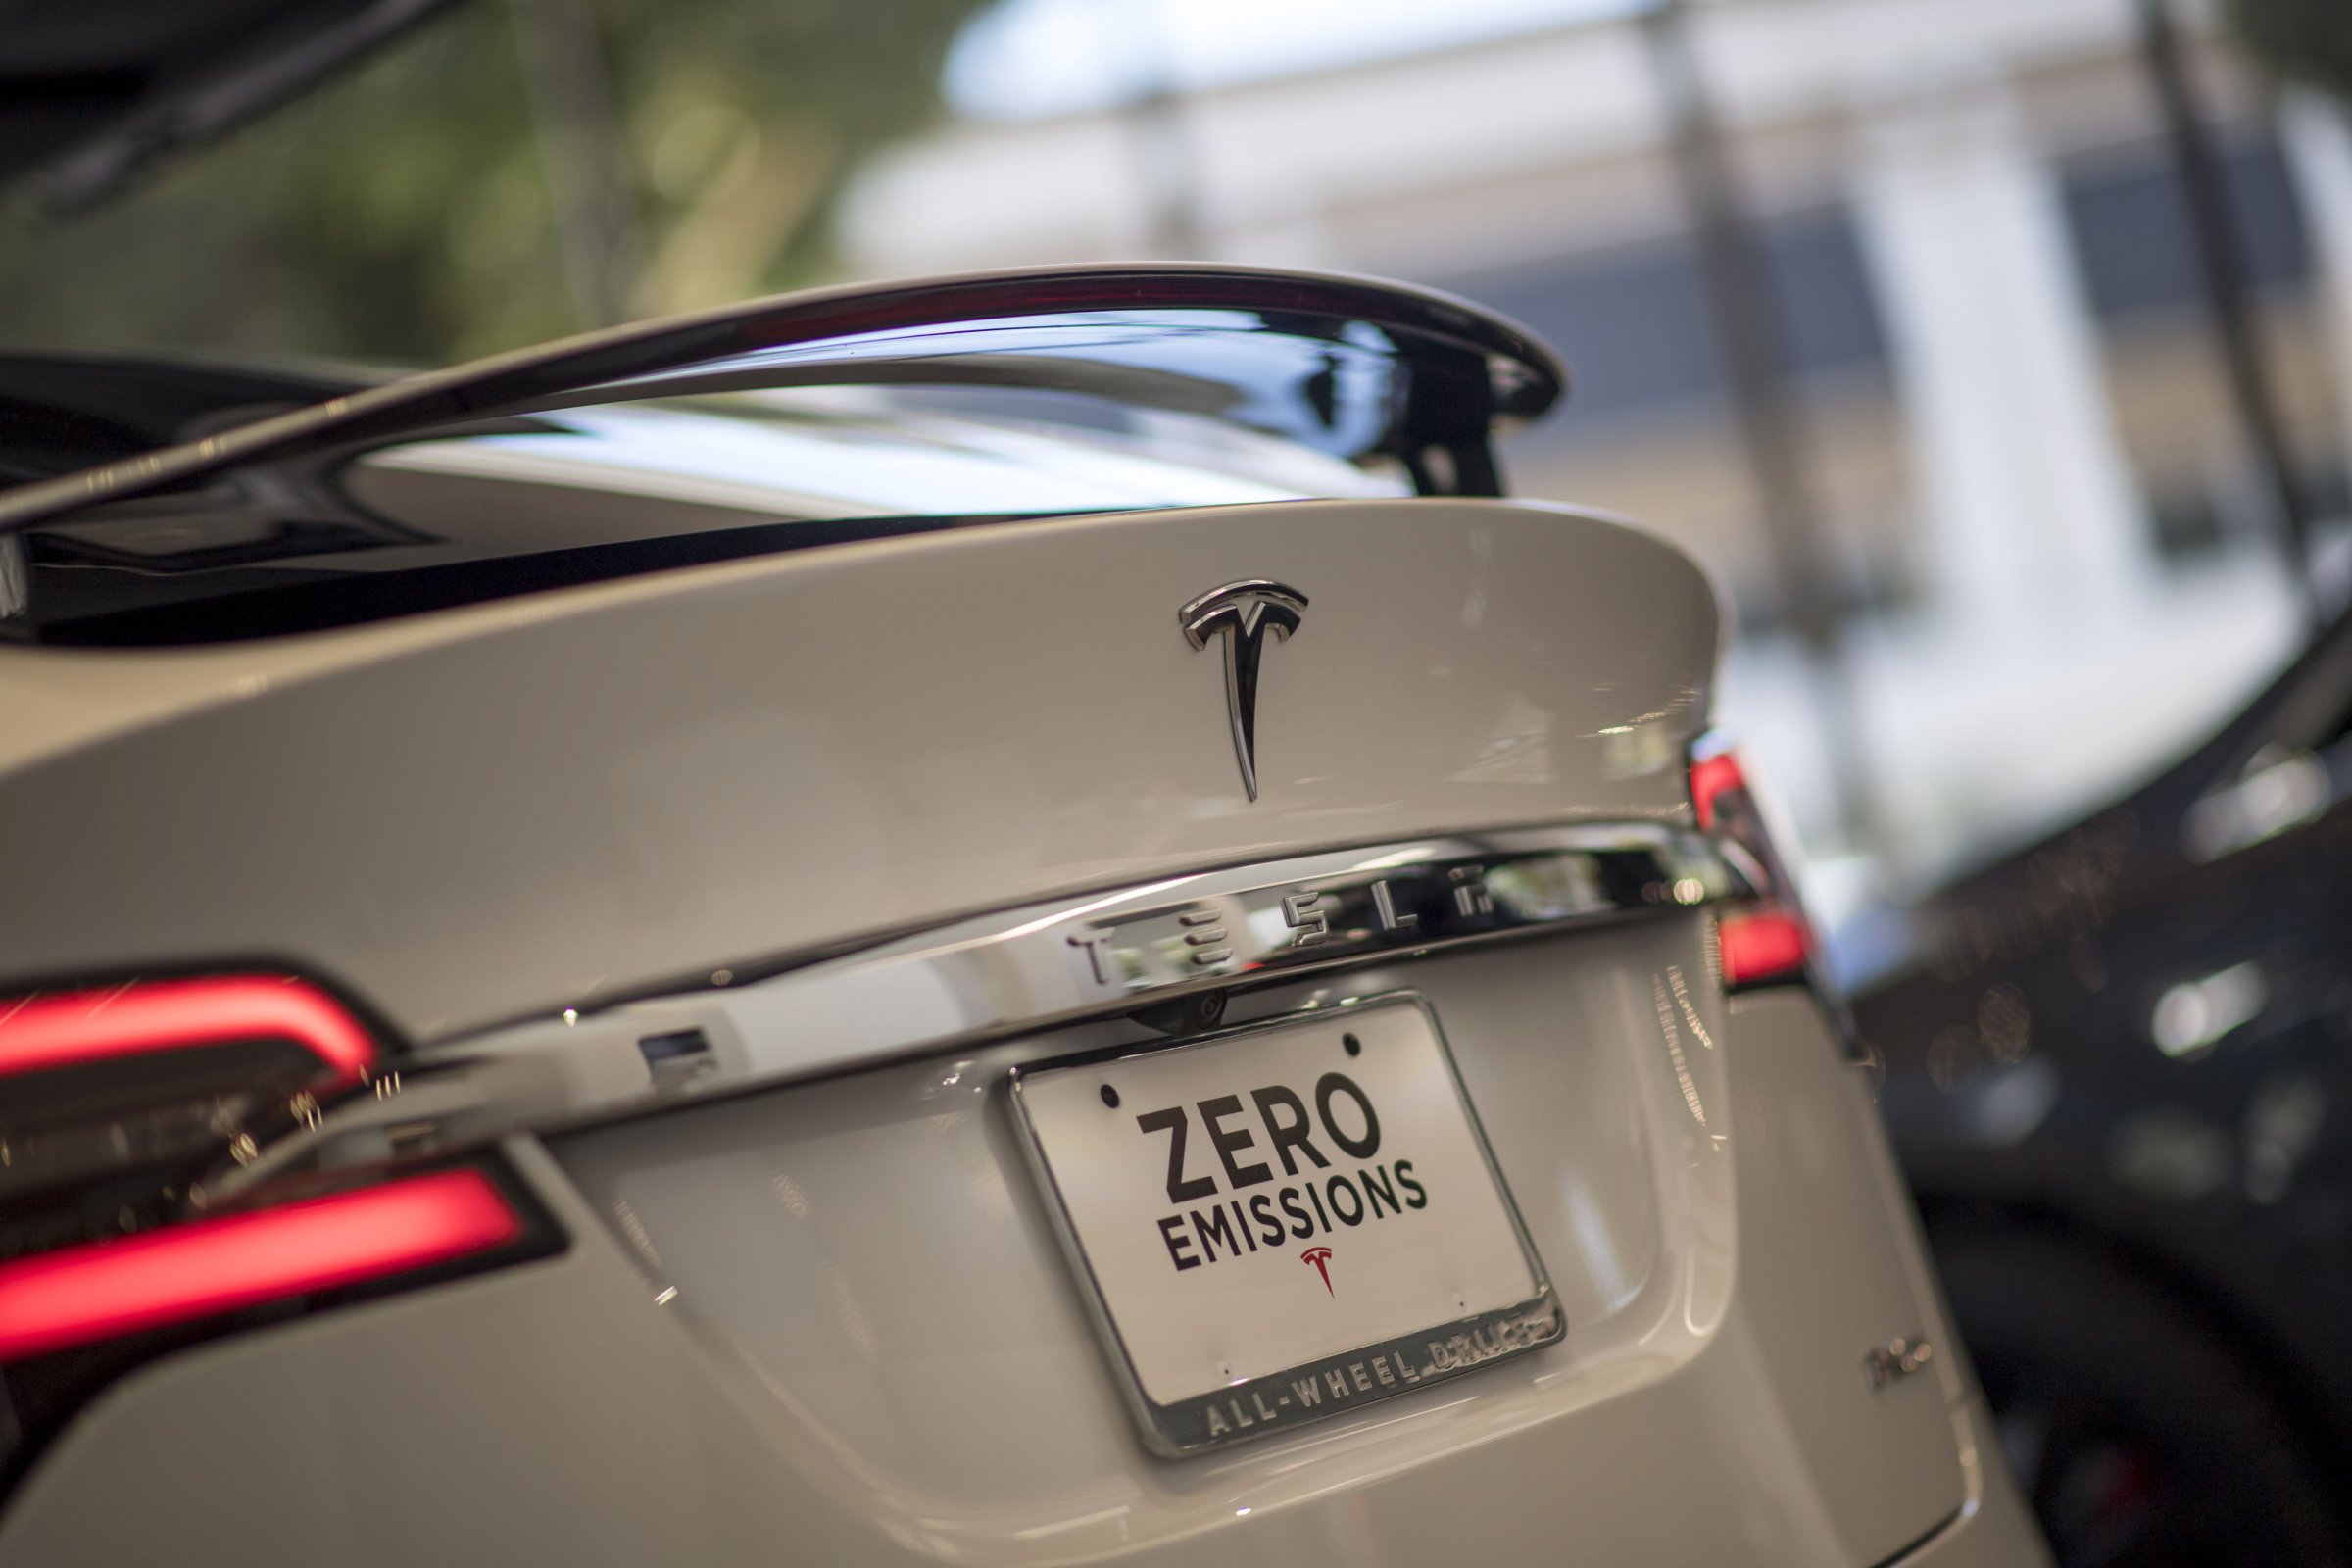 A Tesla Motors Inc. Model S vehicle is displayed at the company's new showroom in San Francisco, California, U.S., on Wednesday, Aug. 10, 2016.